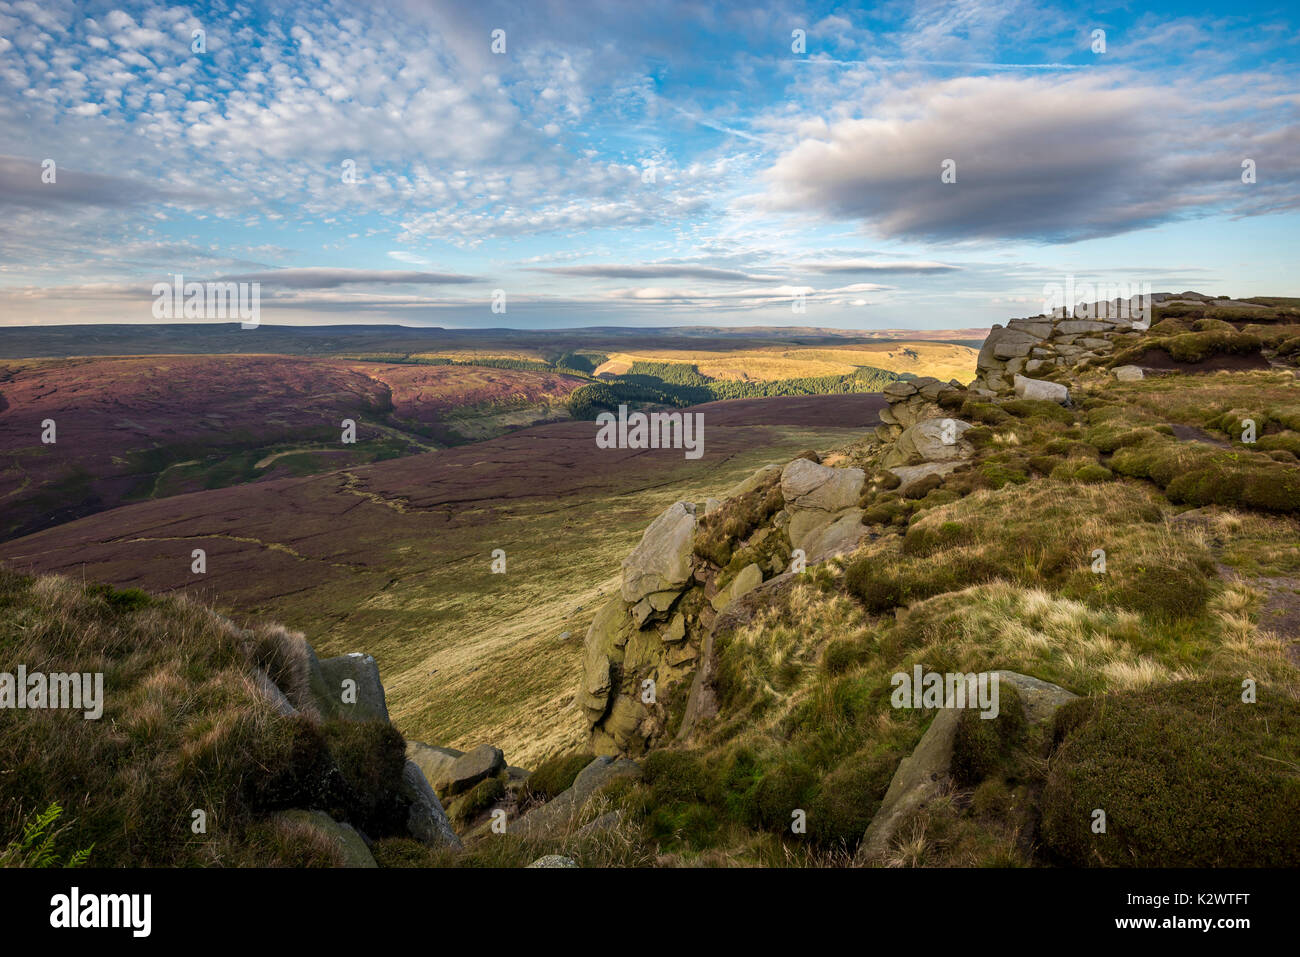 Beautiful summer evening on the northern edge of Kinder Scout in the Peak District, Derbyshire, England. Stock Photo